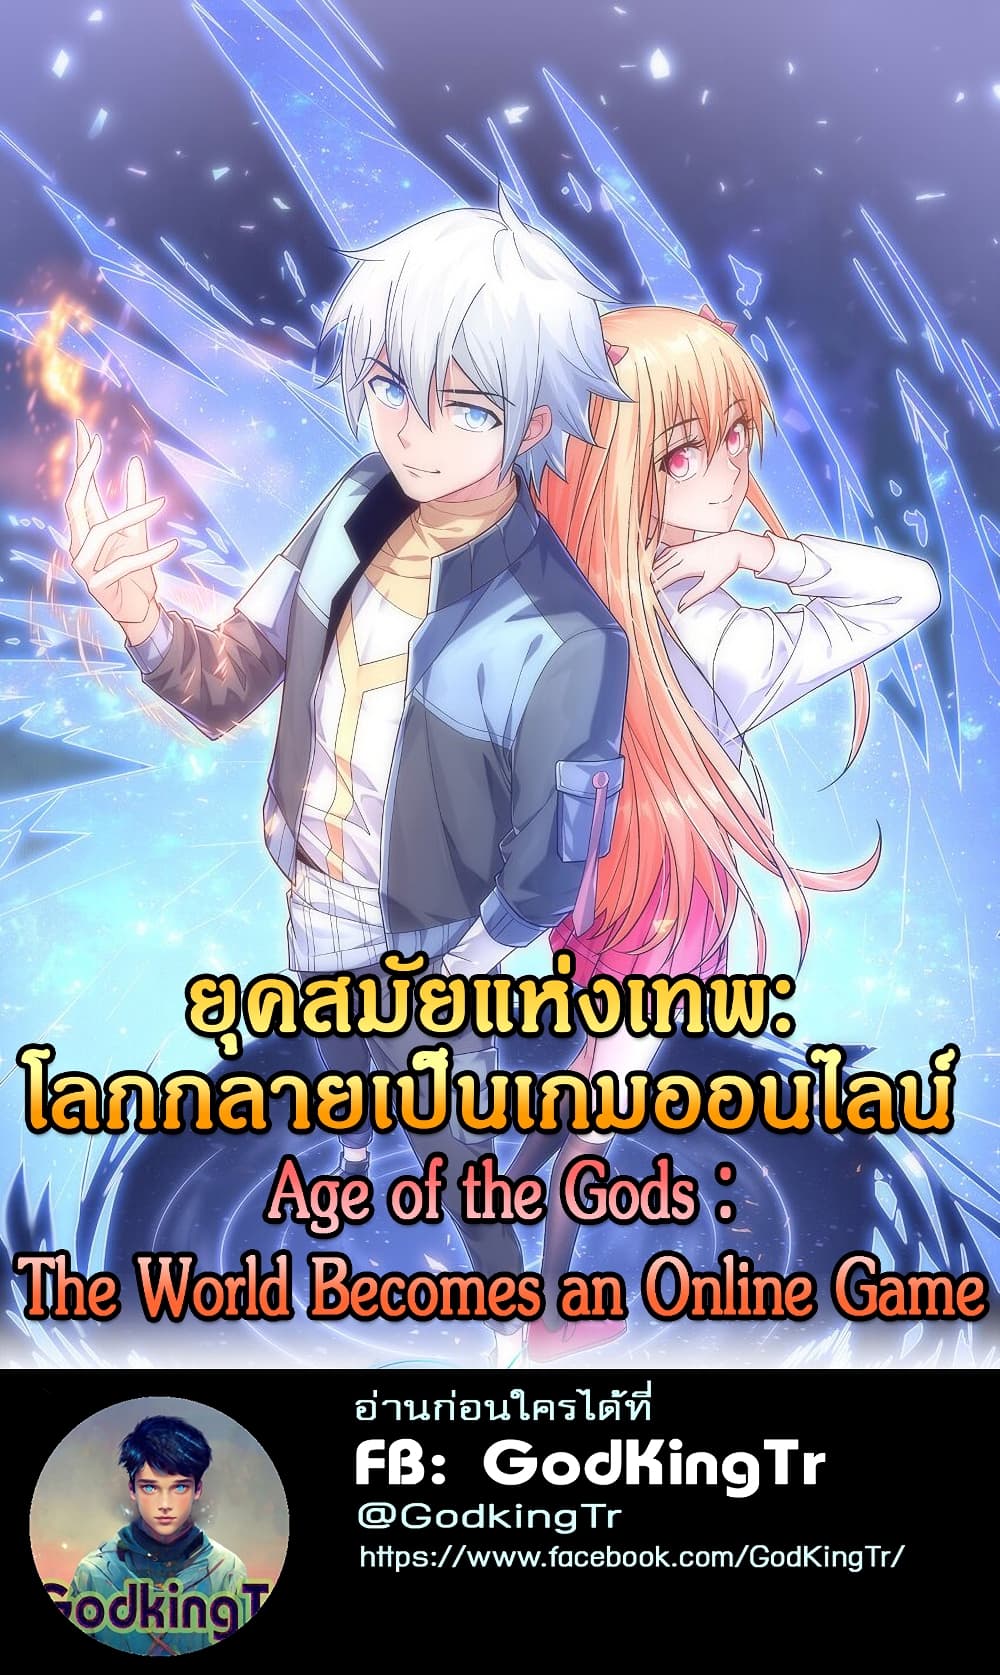 Age of the Gods: The World Becomes an Online Game 10-10